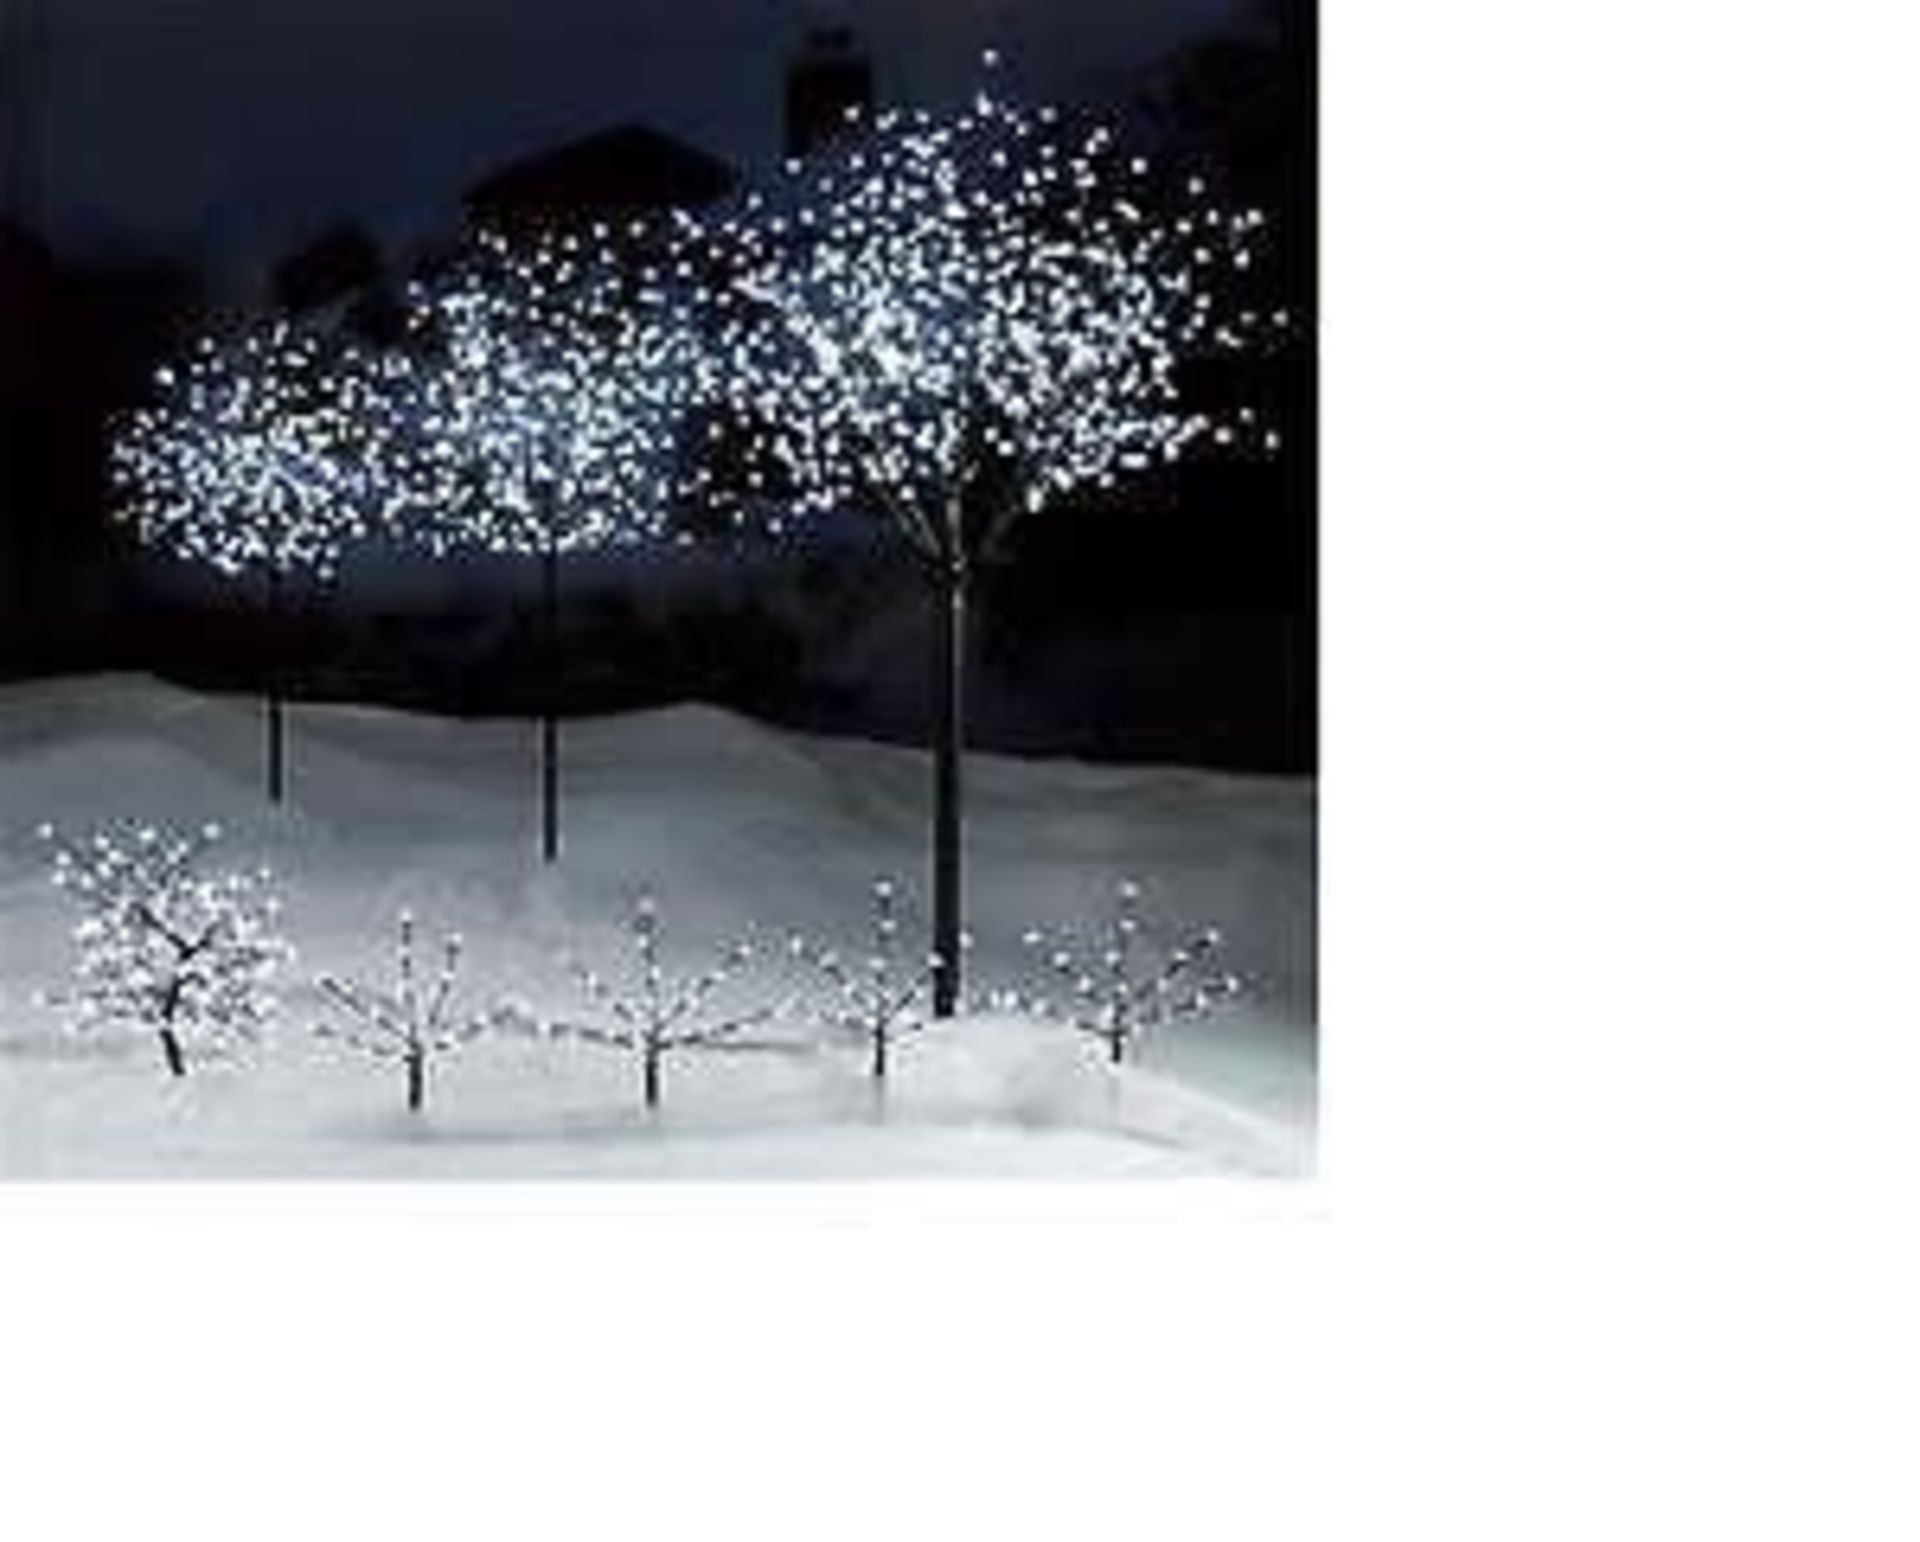 V Brand New 150cm Snow White LED Blossom Tree For Indoor And Outdoor Use RRP £54.99 - Image 4 of 4